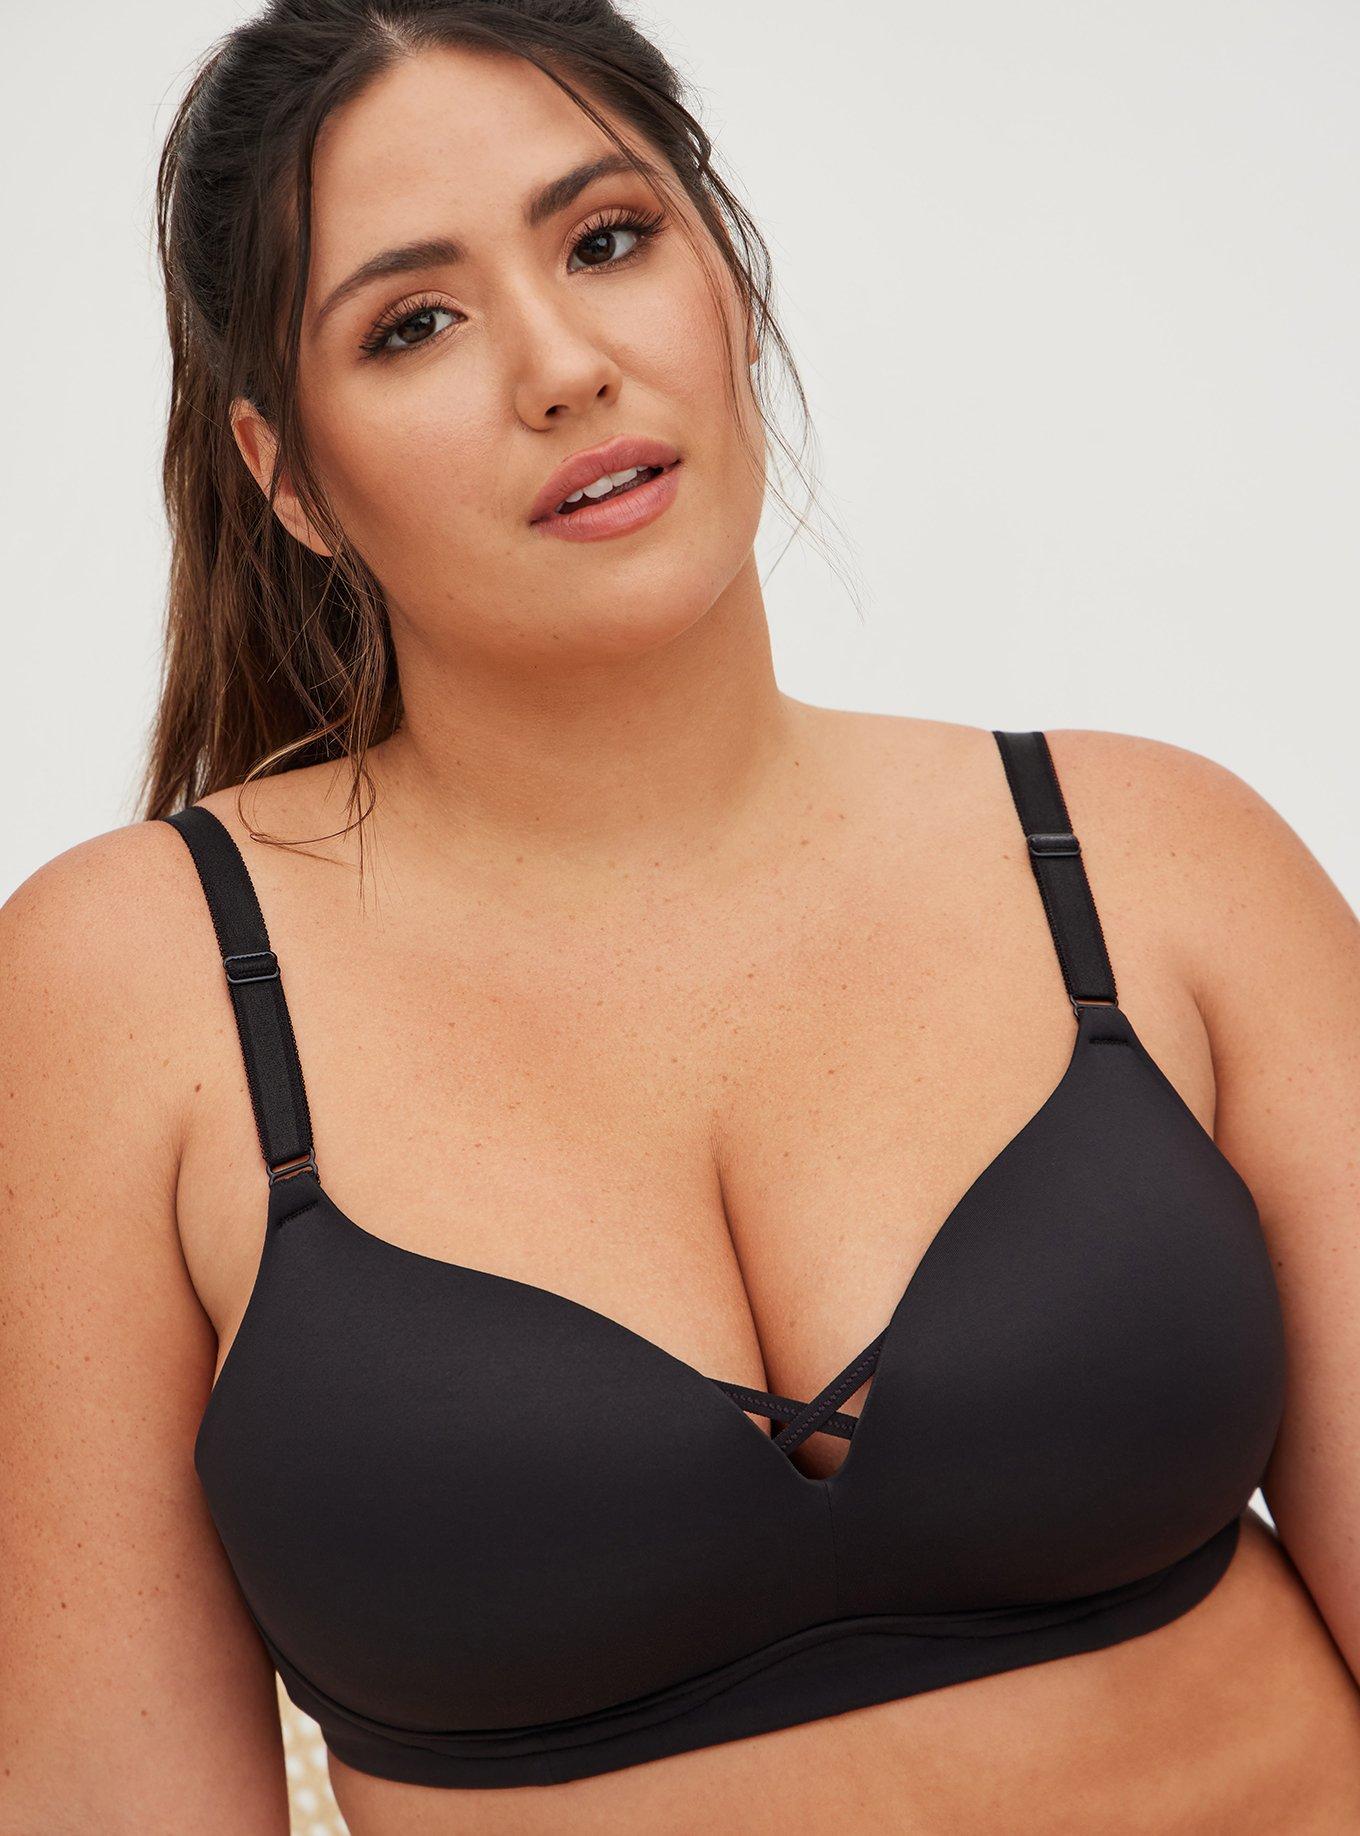 DreamWire Underwire Bra, No-Poke Push-Up Bra, Moderate Coverage,  Convertible T-Shirt Bra, White, 36B : Buy Online at Best Price in KSA -  Souq is now : Fashion